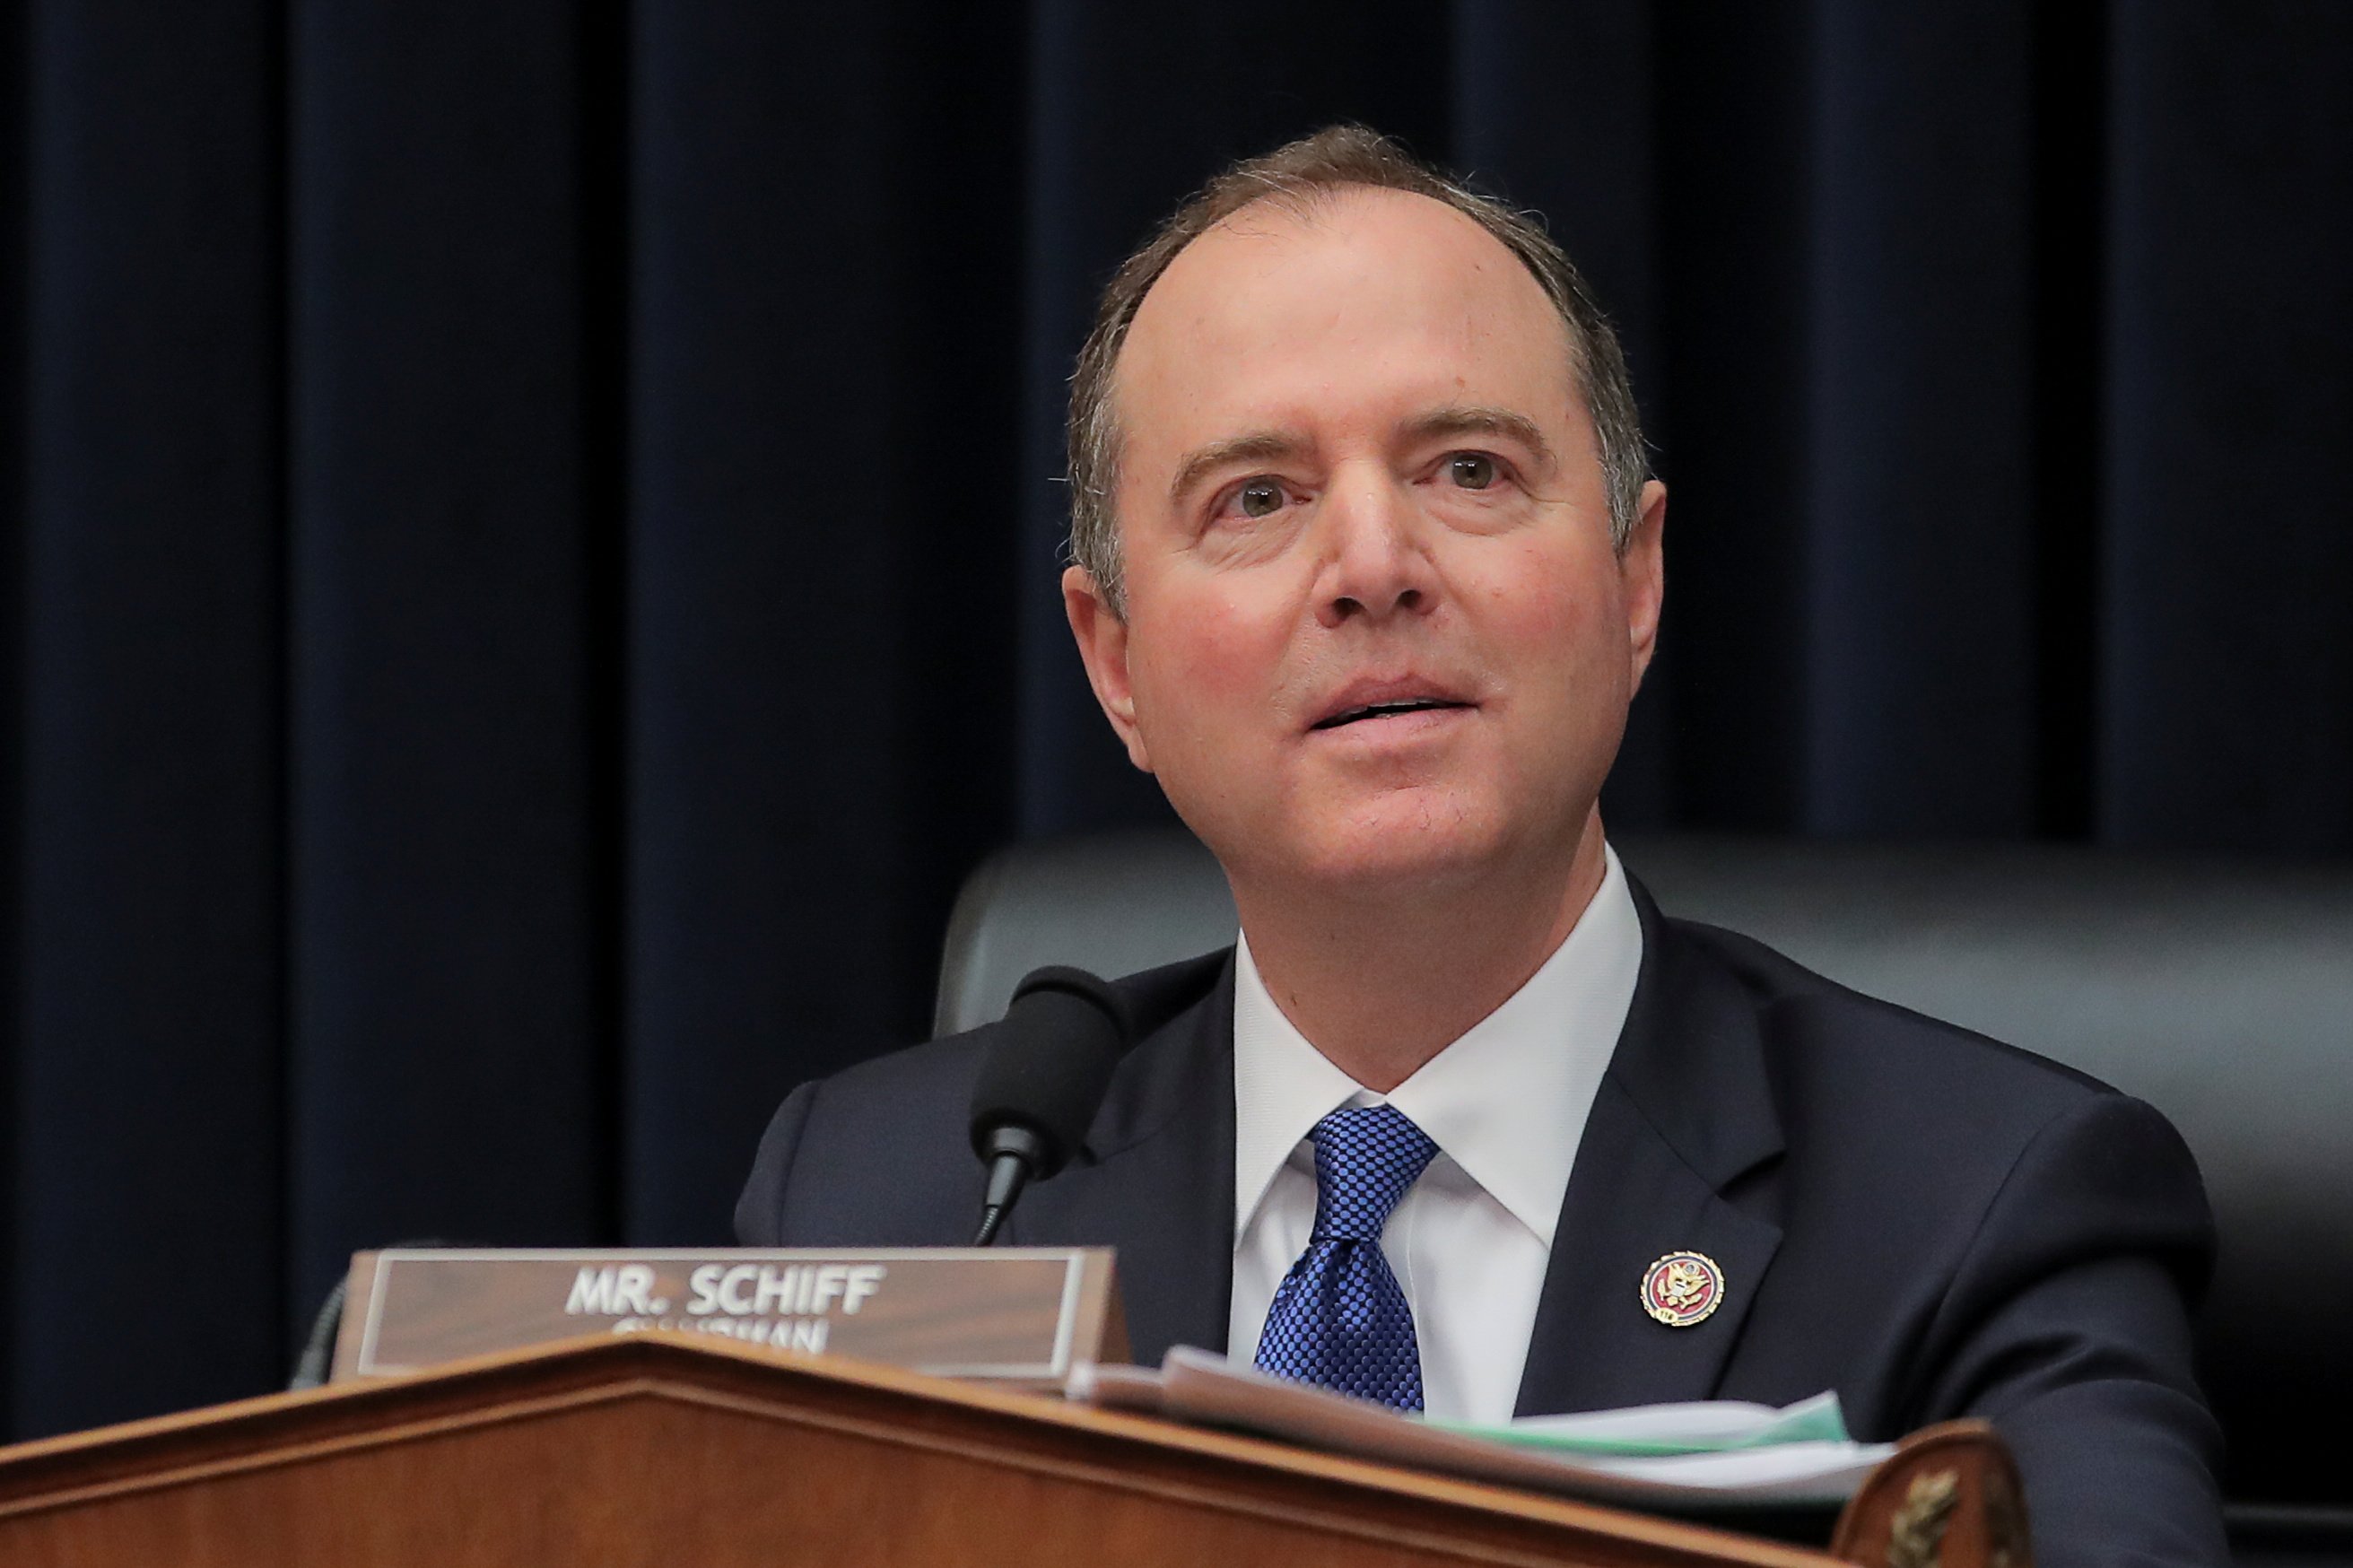 House Intelligence Committee Chairman Adam Schiff (D-CA) chairs a House Intelligence Committee hearing titled "Putin's Playbook: The Kremlin's Use of Oligarchs, Money and Intelligence in 2016 and Beyond" on Capitol Hill in Washington, U.S., March 28, 2019. REUTERS/Brendan McDermid